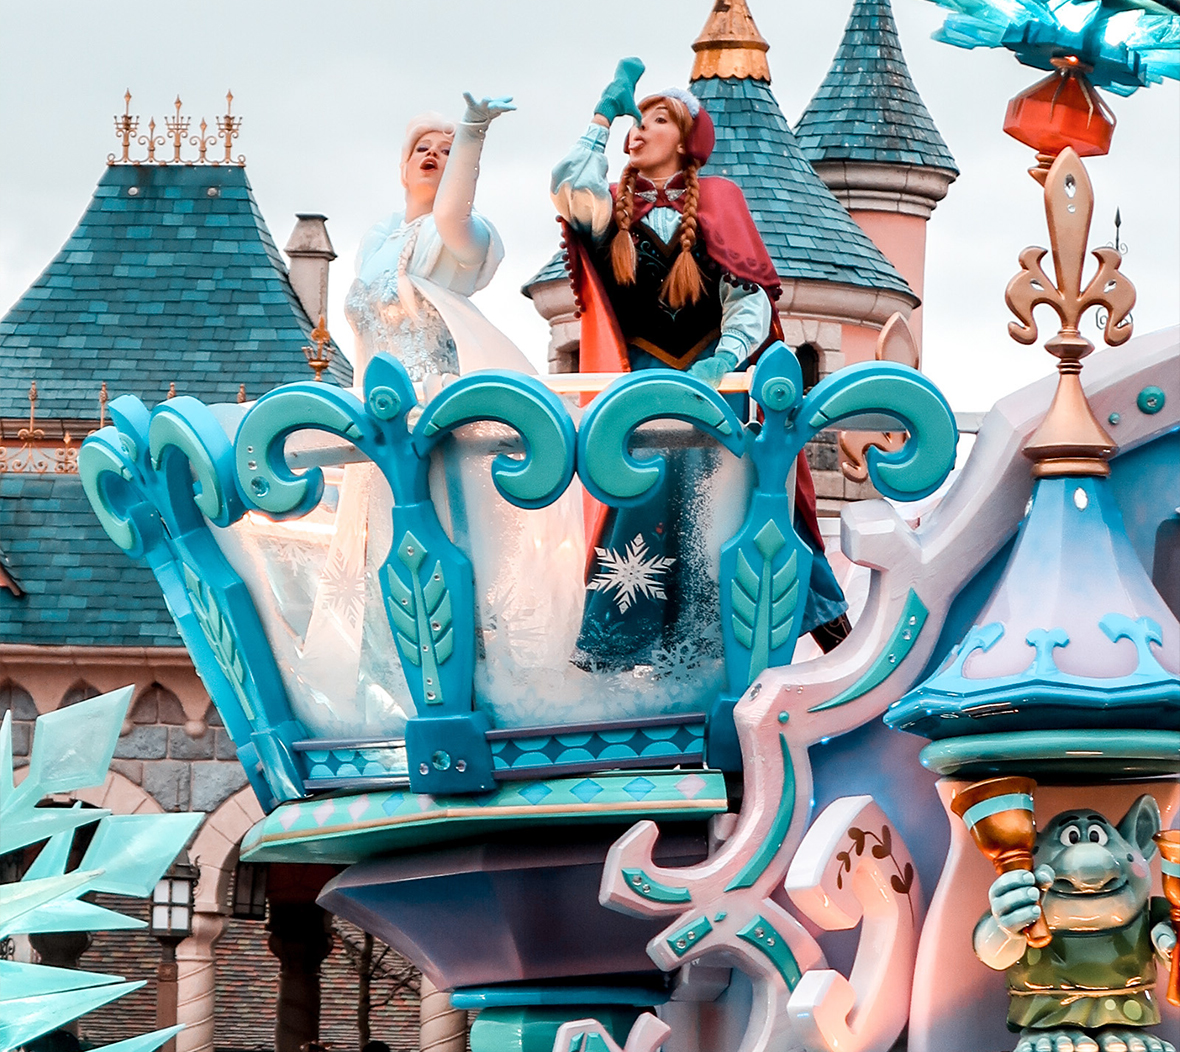 Disney’s Elsa and Anna from Frozen on a carnival float in a Disneyland Paris parade